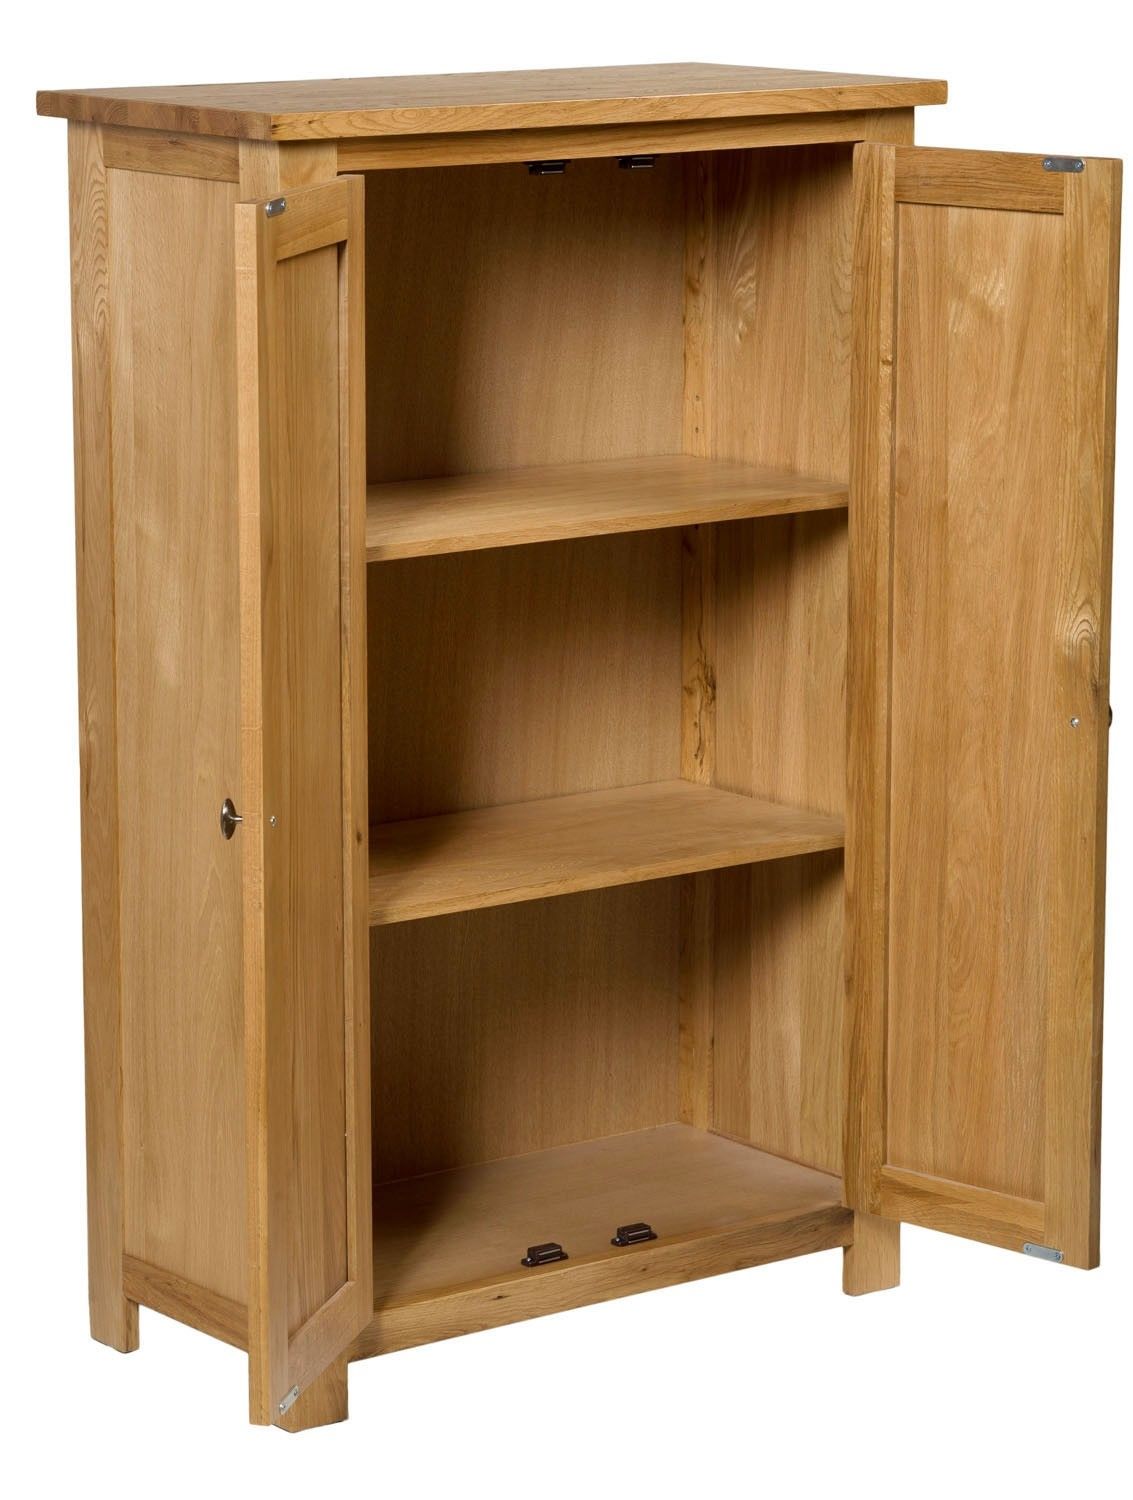 Waverly Oak Small Wide Cabinet Cupboard With 3 Shelves Hallowood In Small Oak Cupboard (View 7 of 15)